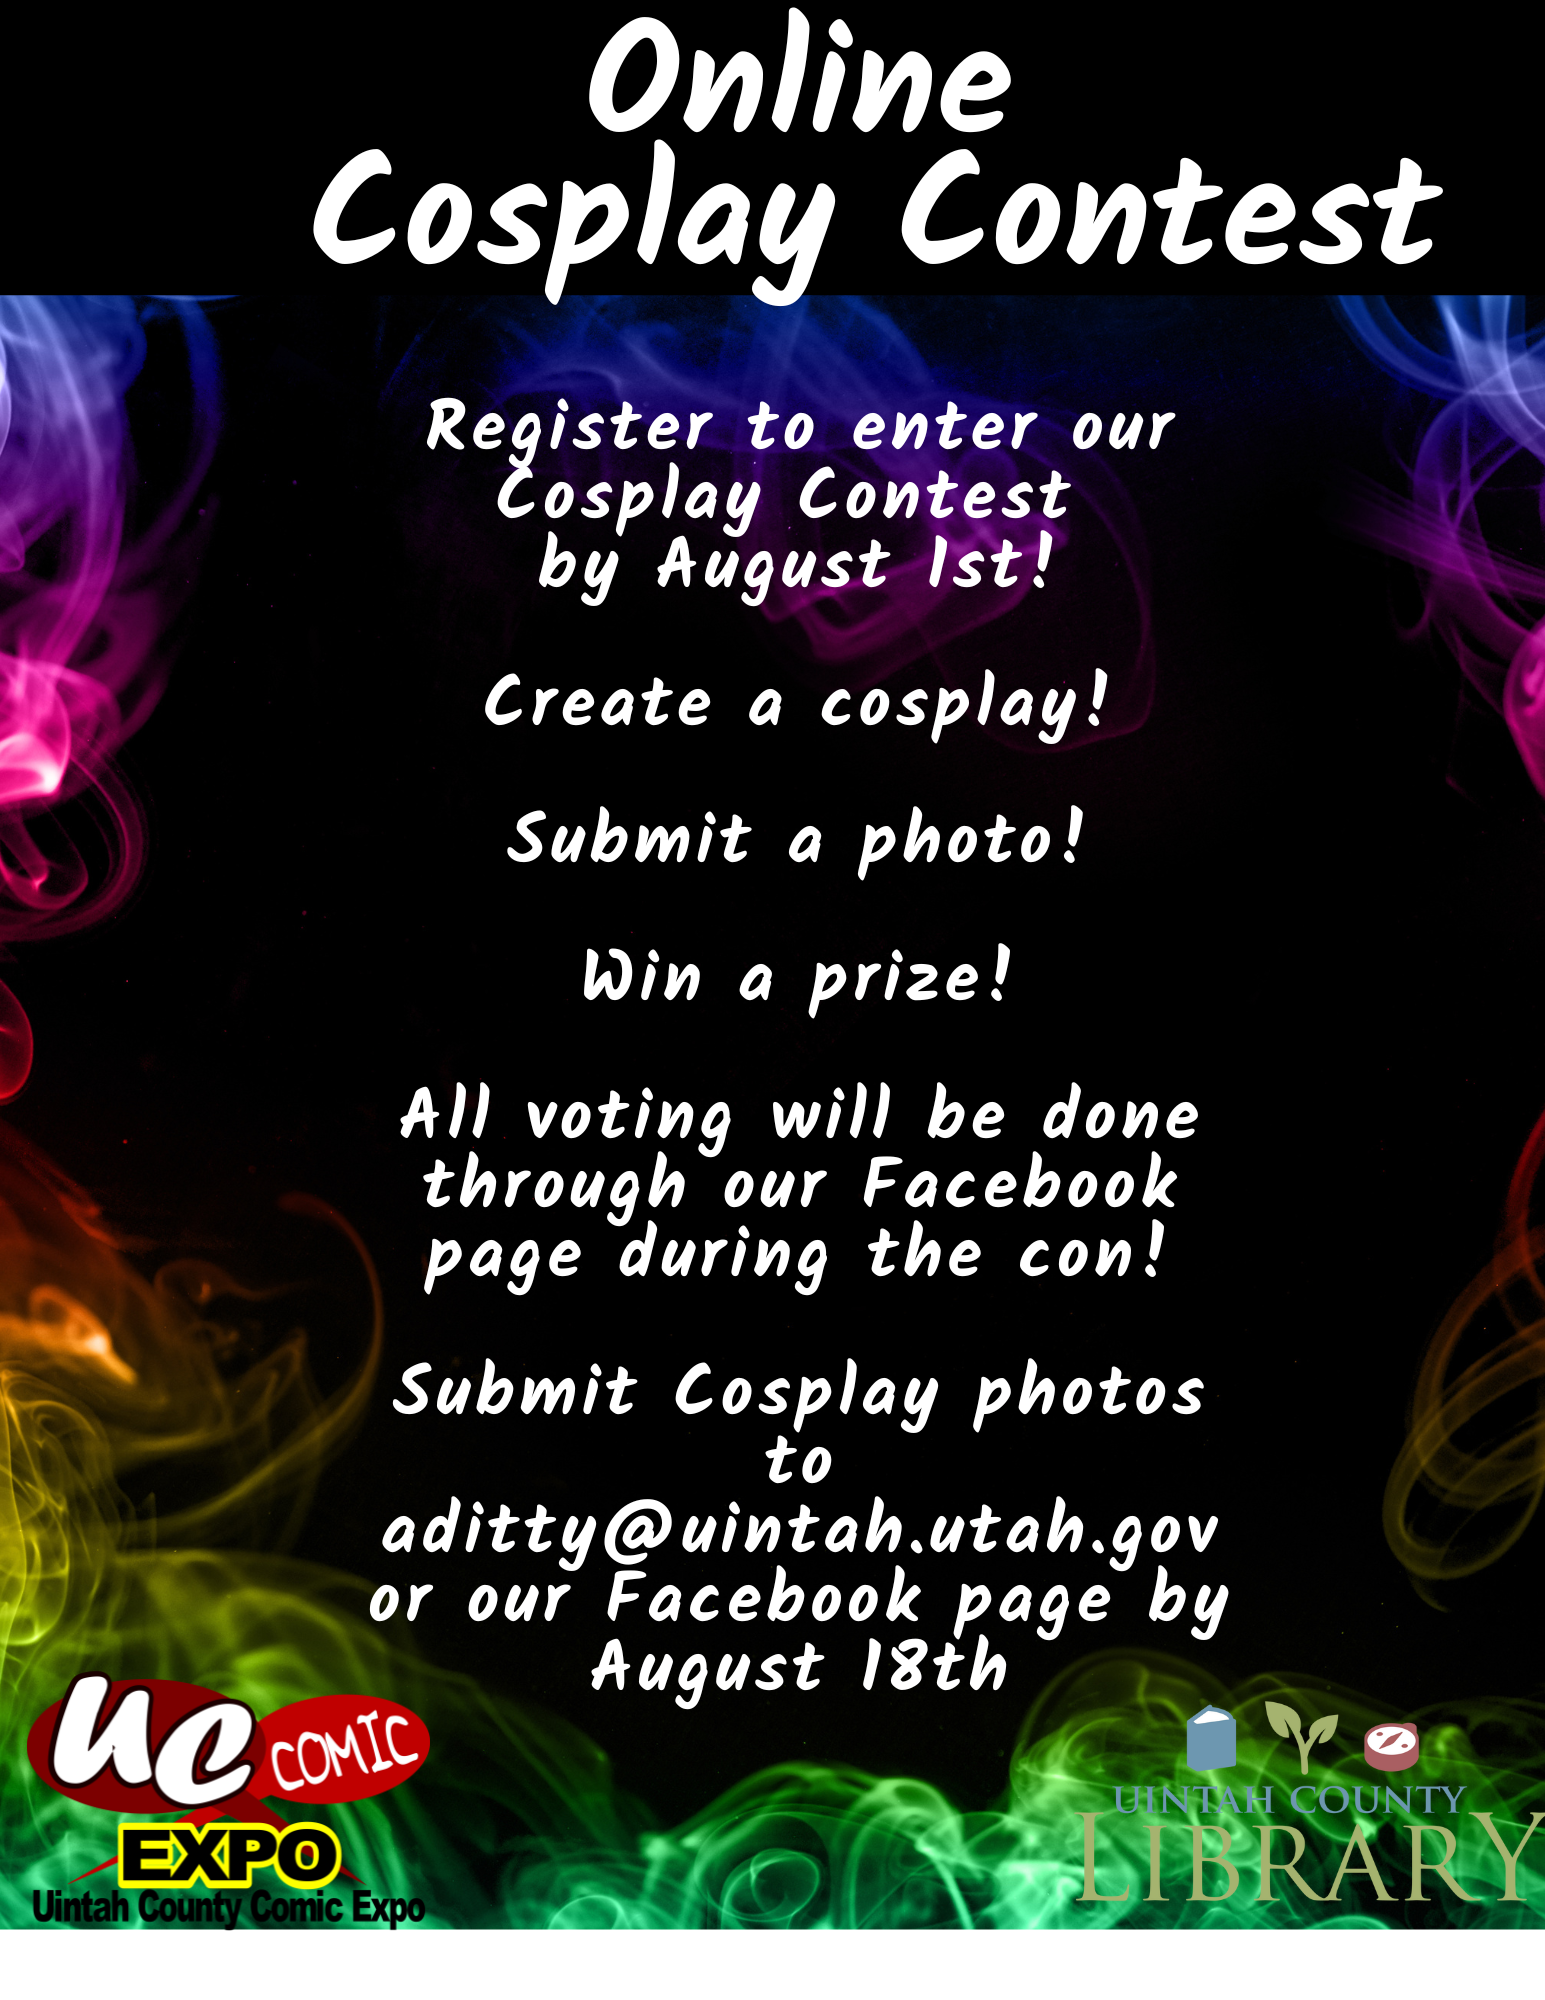 Online Cosplay Contest | Register to enter our Cosplay Contest by August 1st! | Create a cosplay! Submit a photo! Win a prize! | All voting will be done through our Facebook page during the con! | Submit Cosplay photos to aditty@uintah.utah.gov or our Facebook page by August 18th